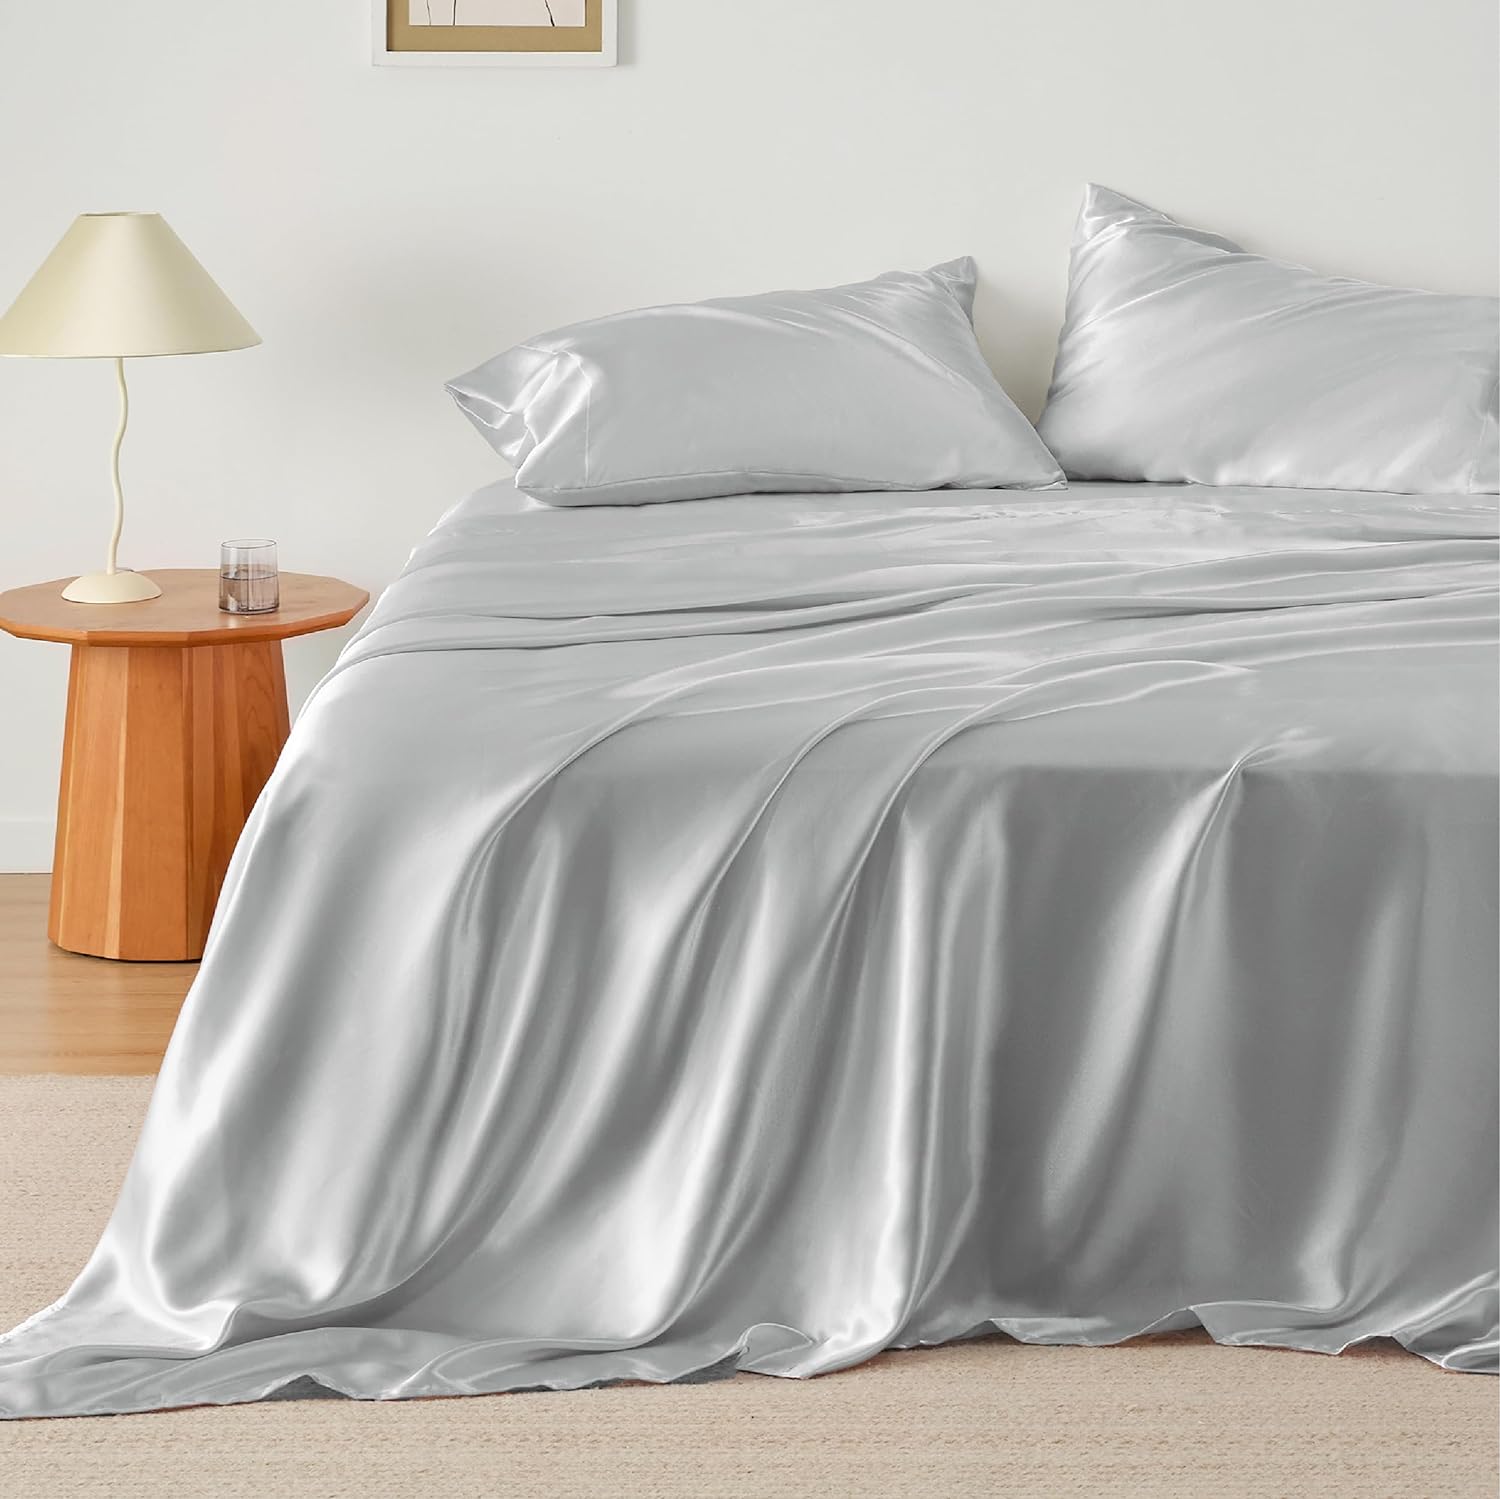 Bedsure Satin Sheets - Soft Satin Bed Sheets Twin, 3 Pcs Luxury Silky Sheets, Similar to Silk Sheets, Silver Grey Satin Sheets Twin for Hair and Skin, Gifts for Women